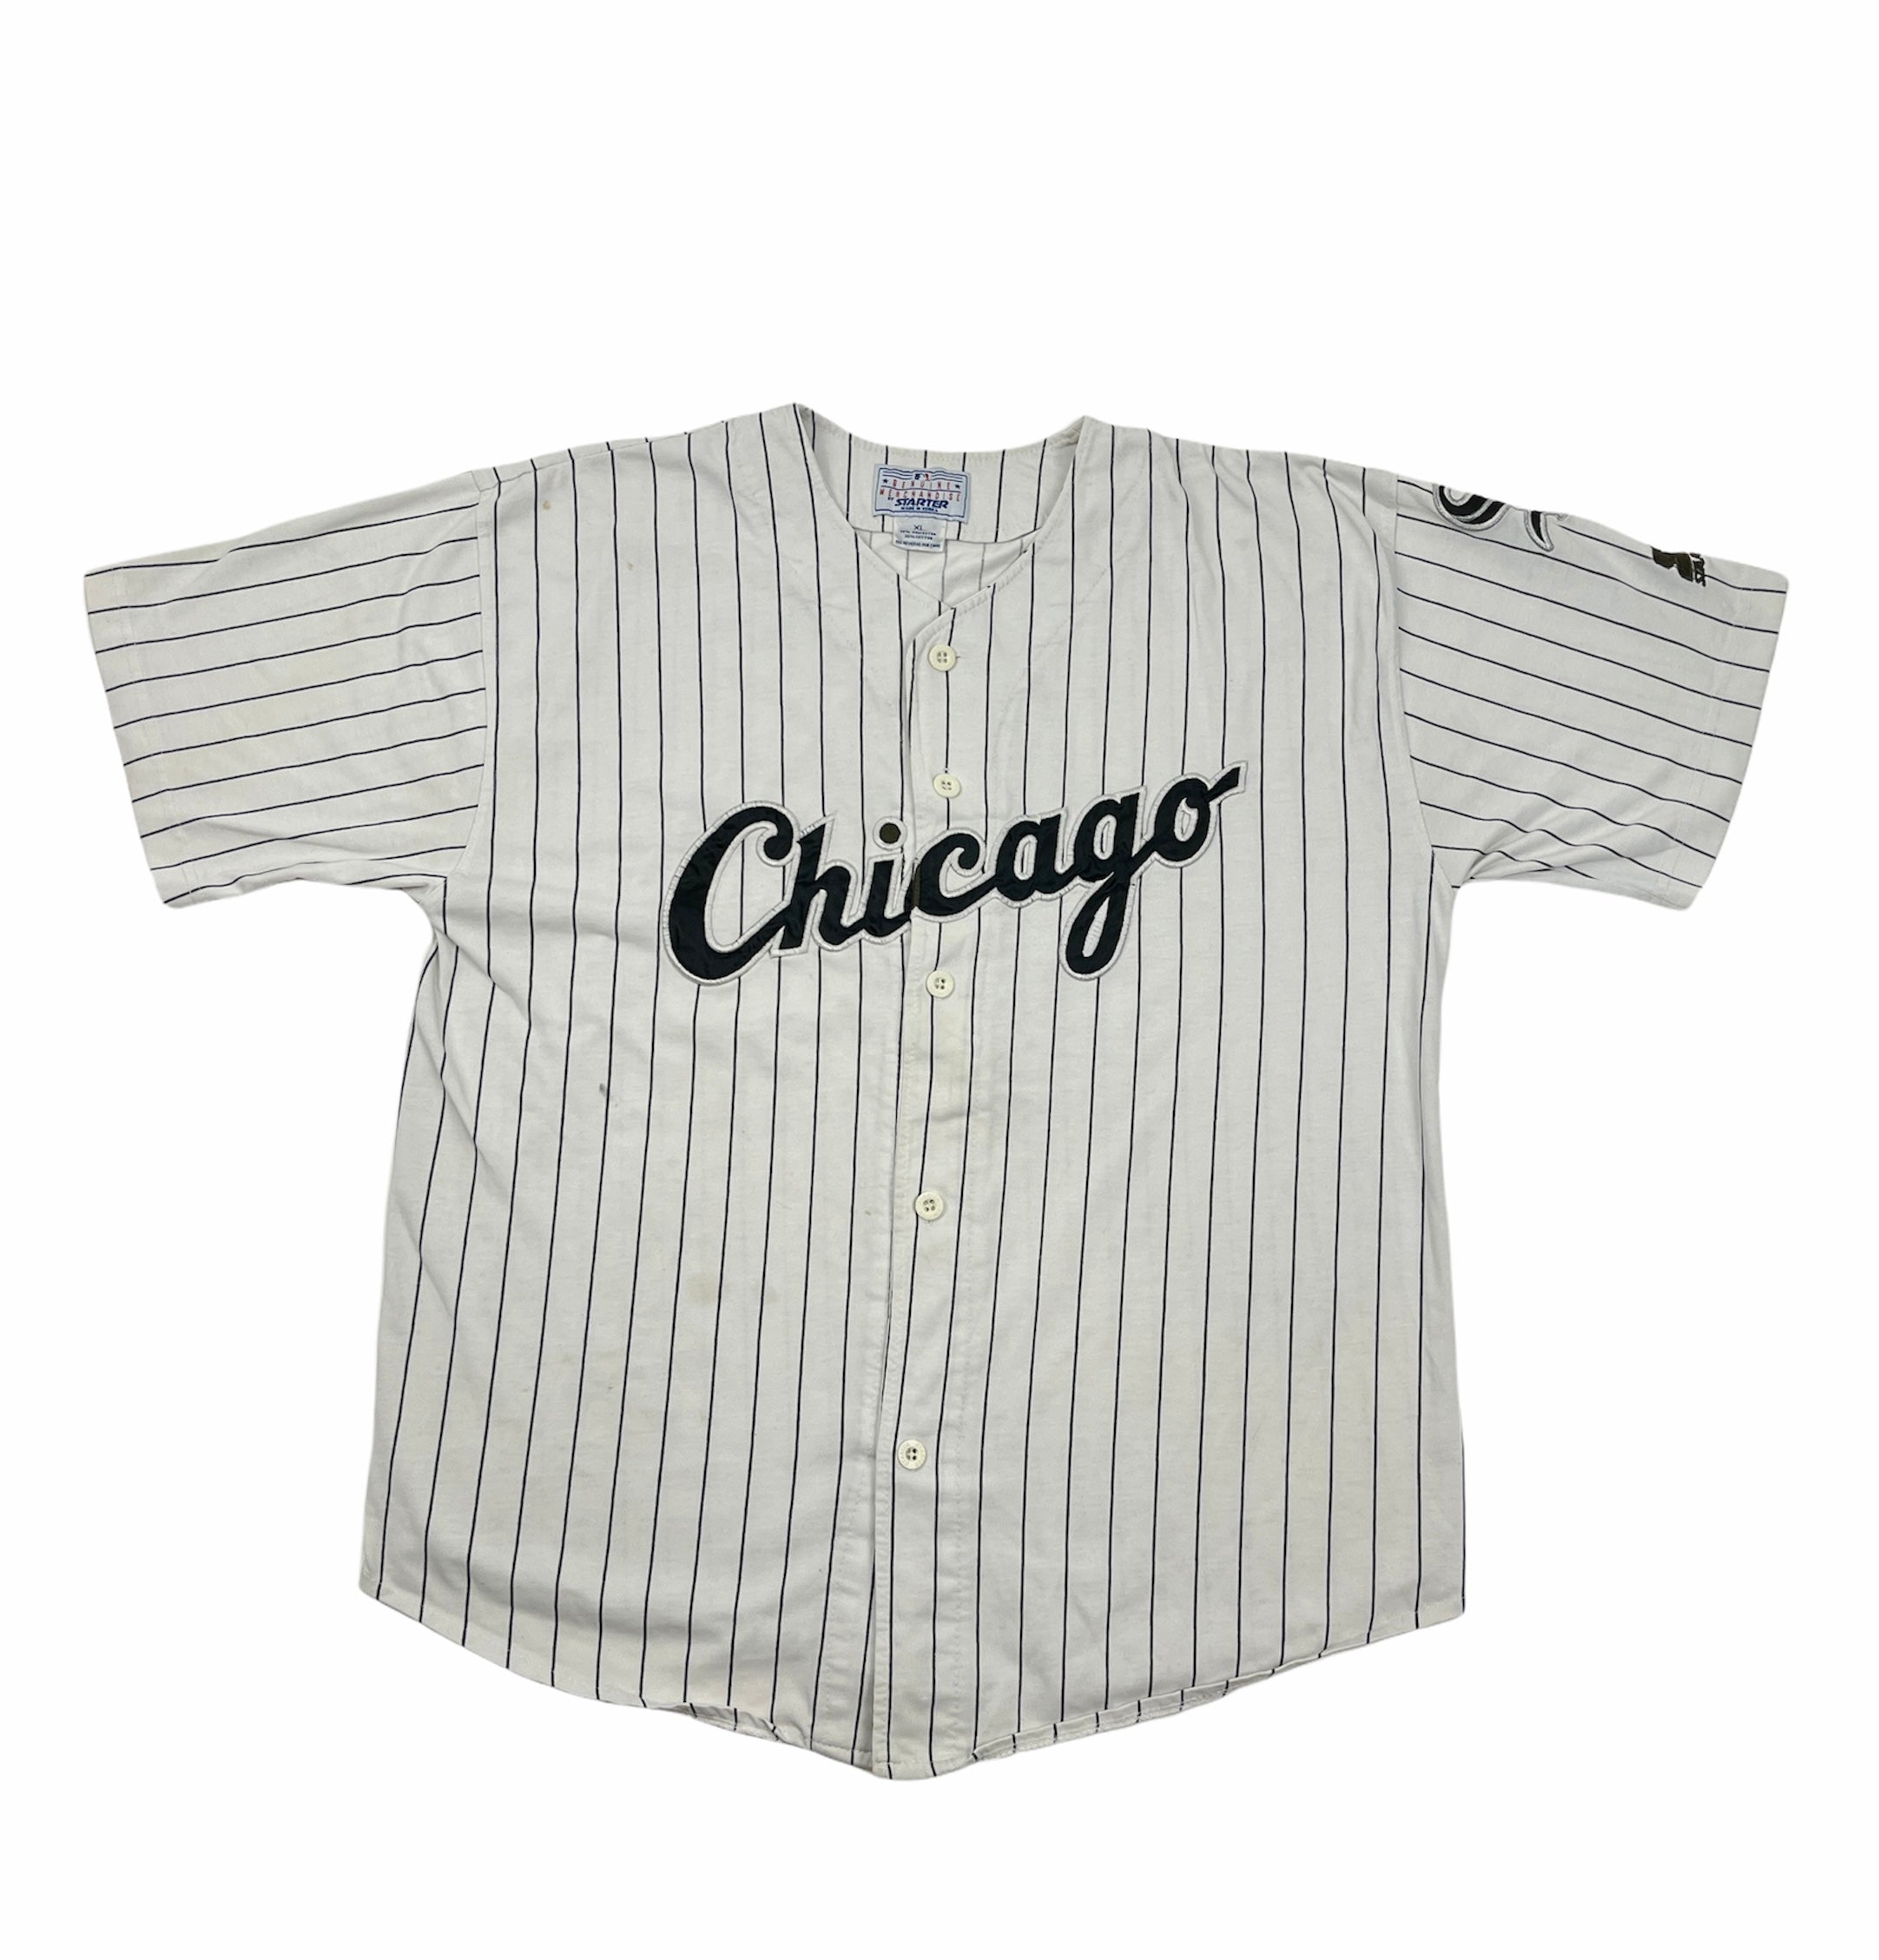 Vintage 70's Chicago White Sox Fan Jersey 